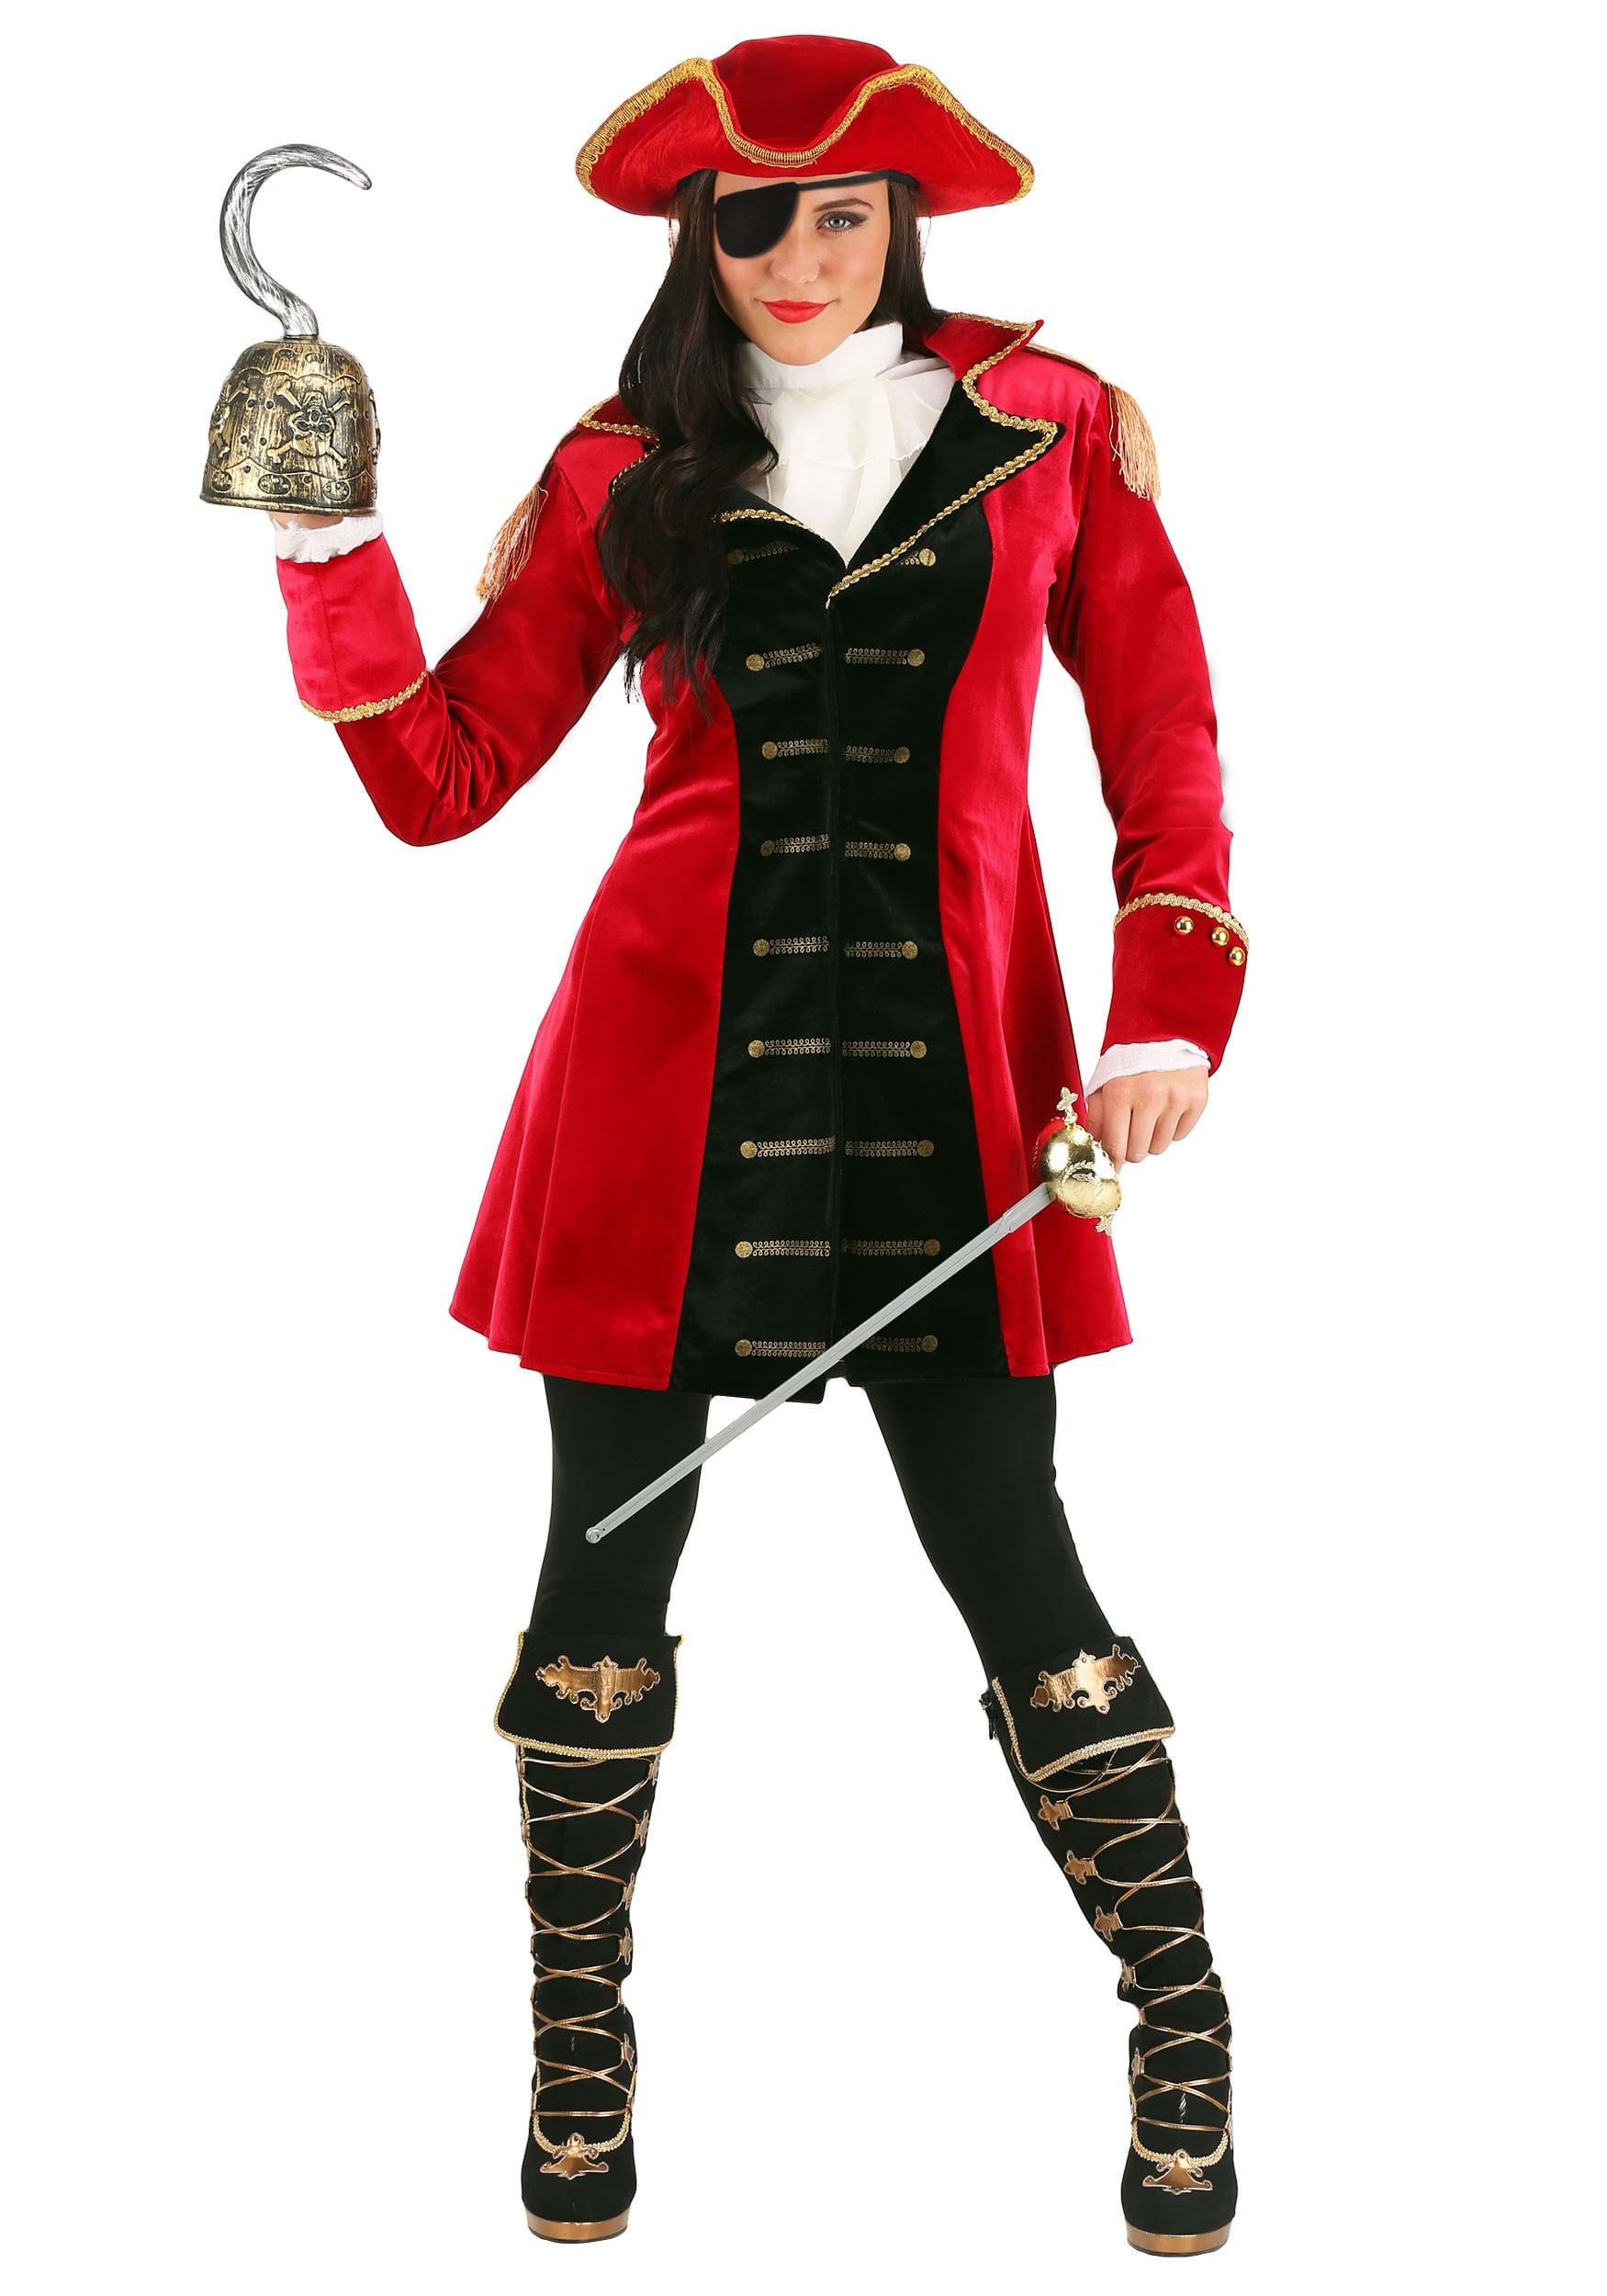 Our Captain Hook and Smeeeee couples halloween costume - the